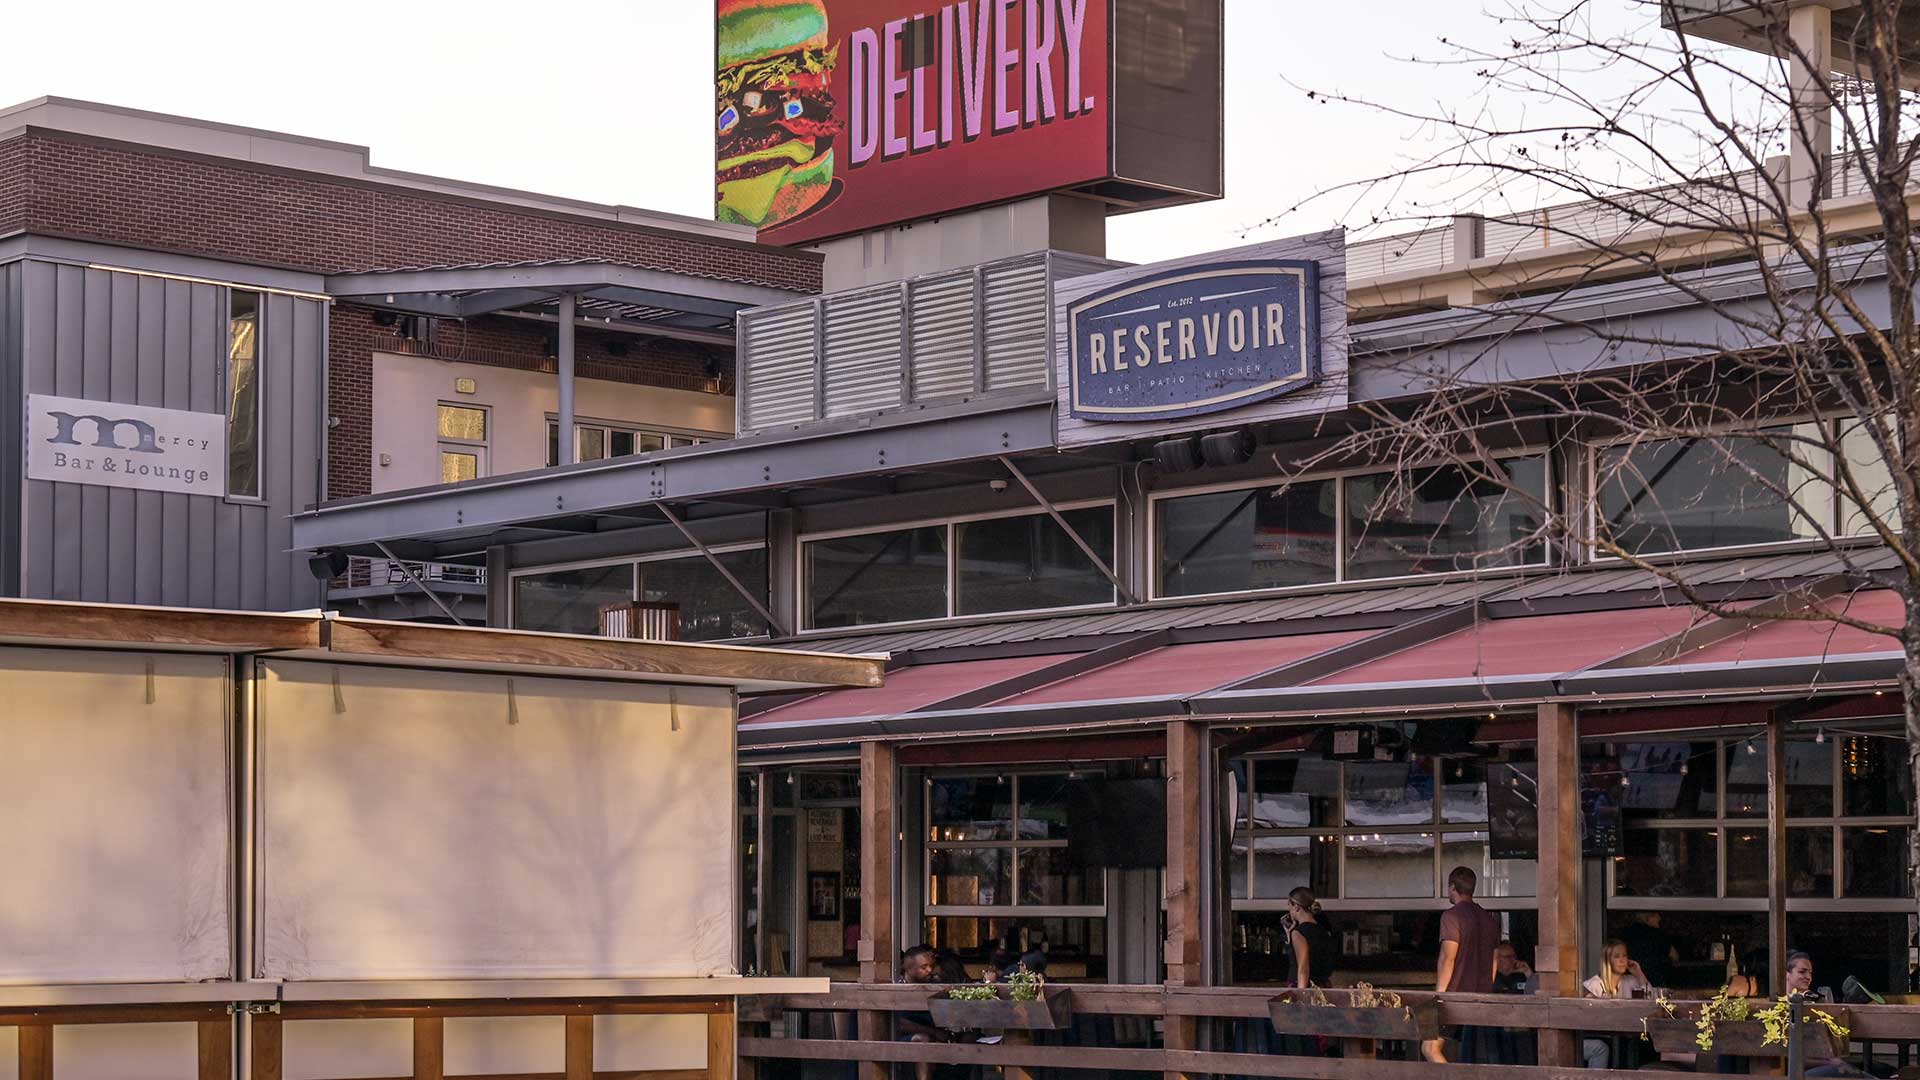 A close look at various outdoor patios at restaurants close to one another. There are signs above, including a large electronic screen.